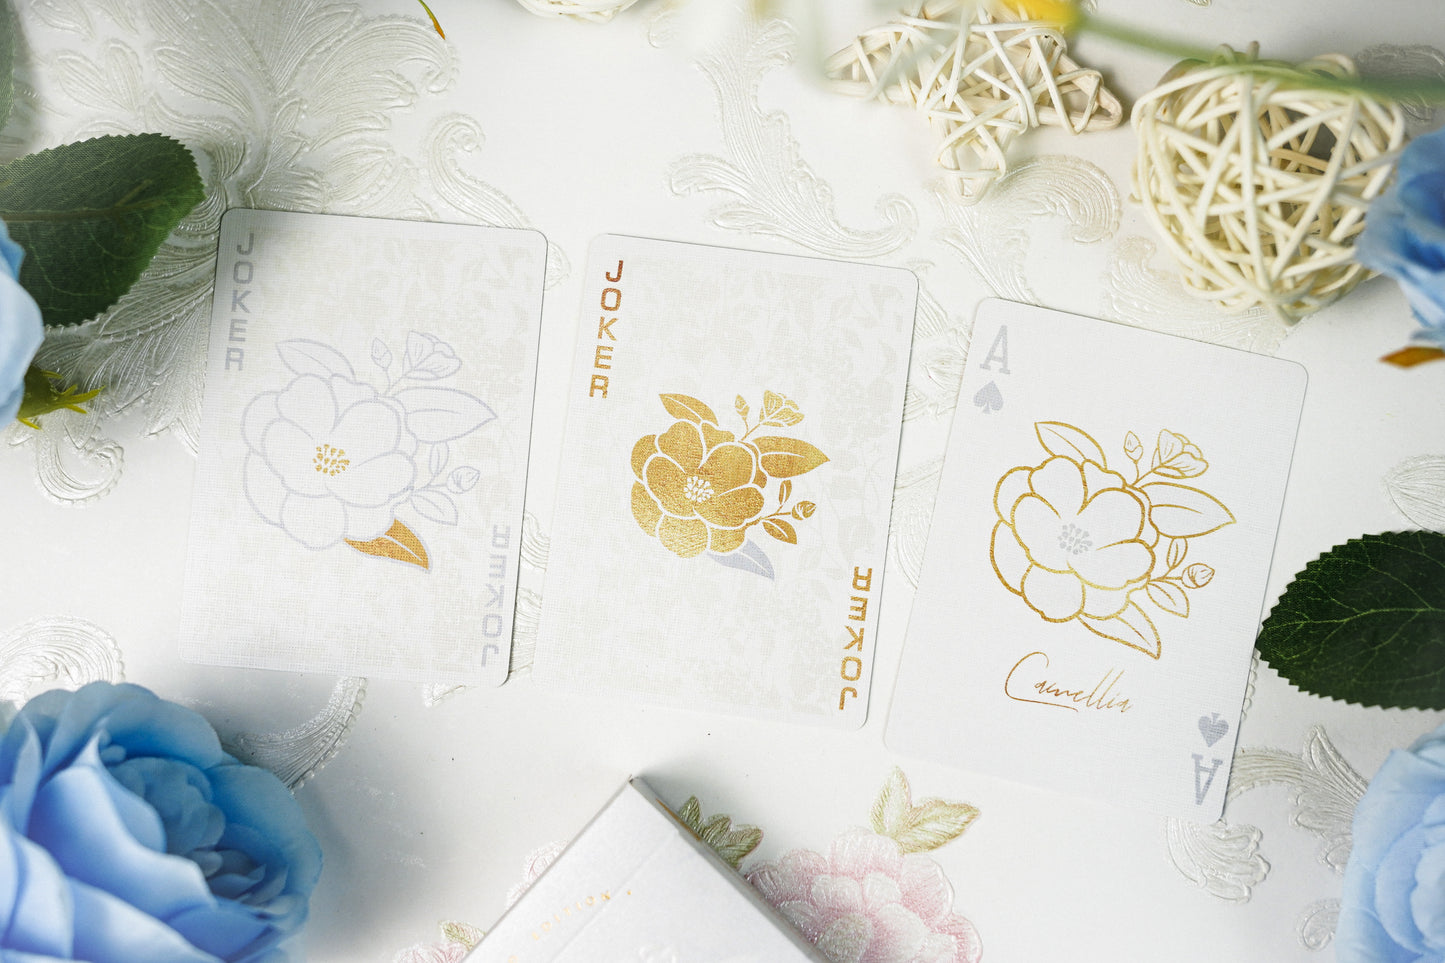 The Language of Flowers Playing Cards by NANA Studio